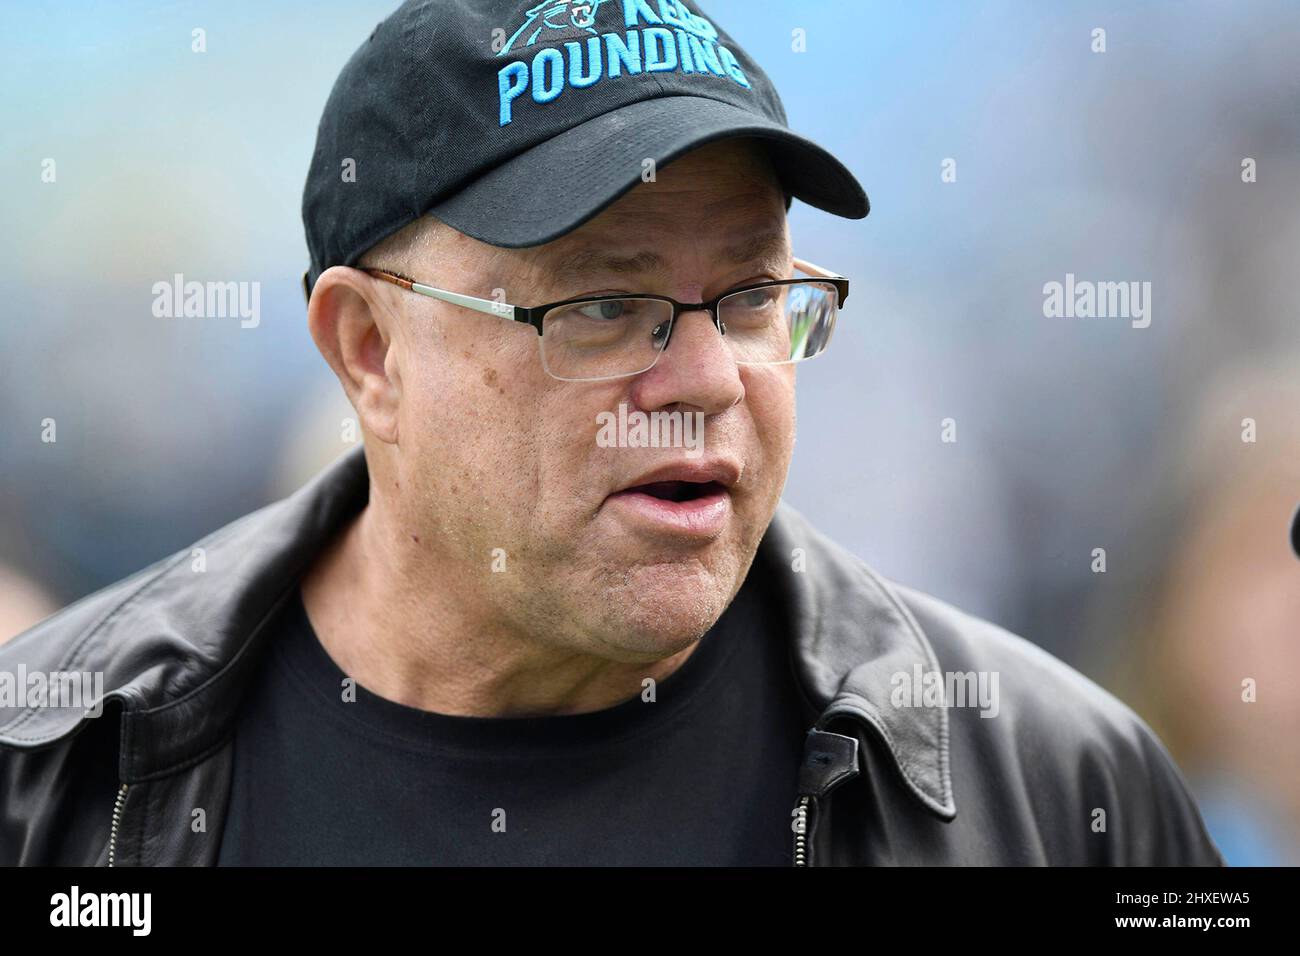 Carolina Panthers owner David Tepper on the sideline as the team warms up prior to playing the New Orleans Saints on December 29, 2019, at at Bank of America Stadium in Charlotte, N.C. (Photo by David T. Foster III/Charlotte Observer/TNS/Sipa USA) Stock Photo